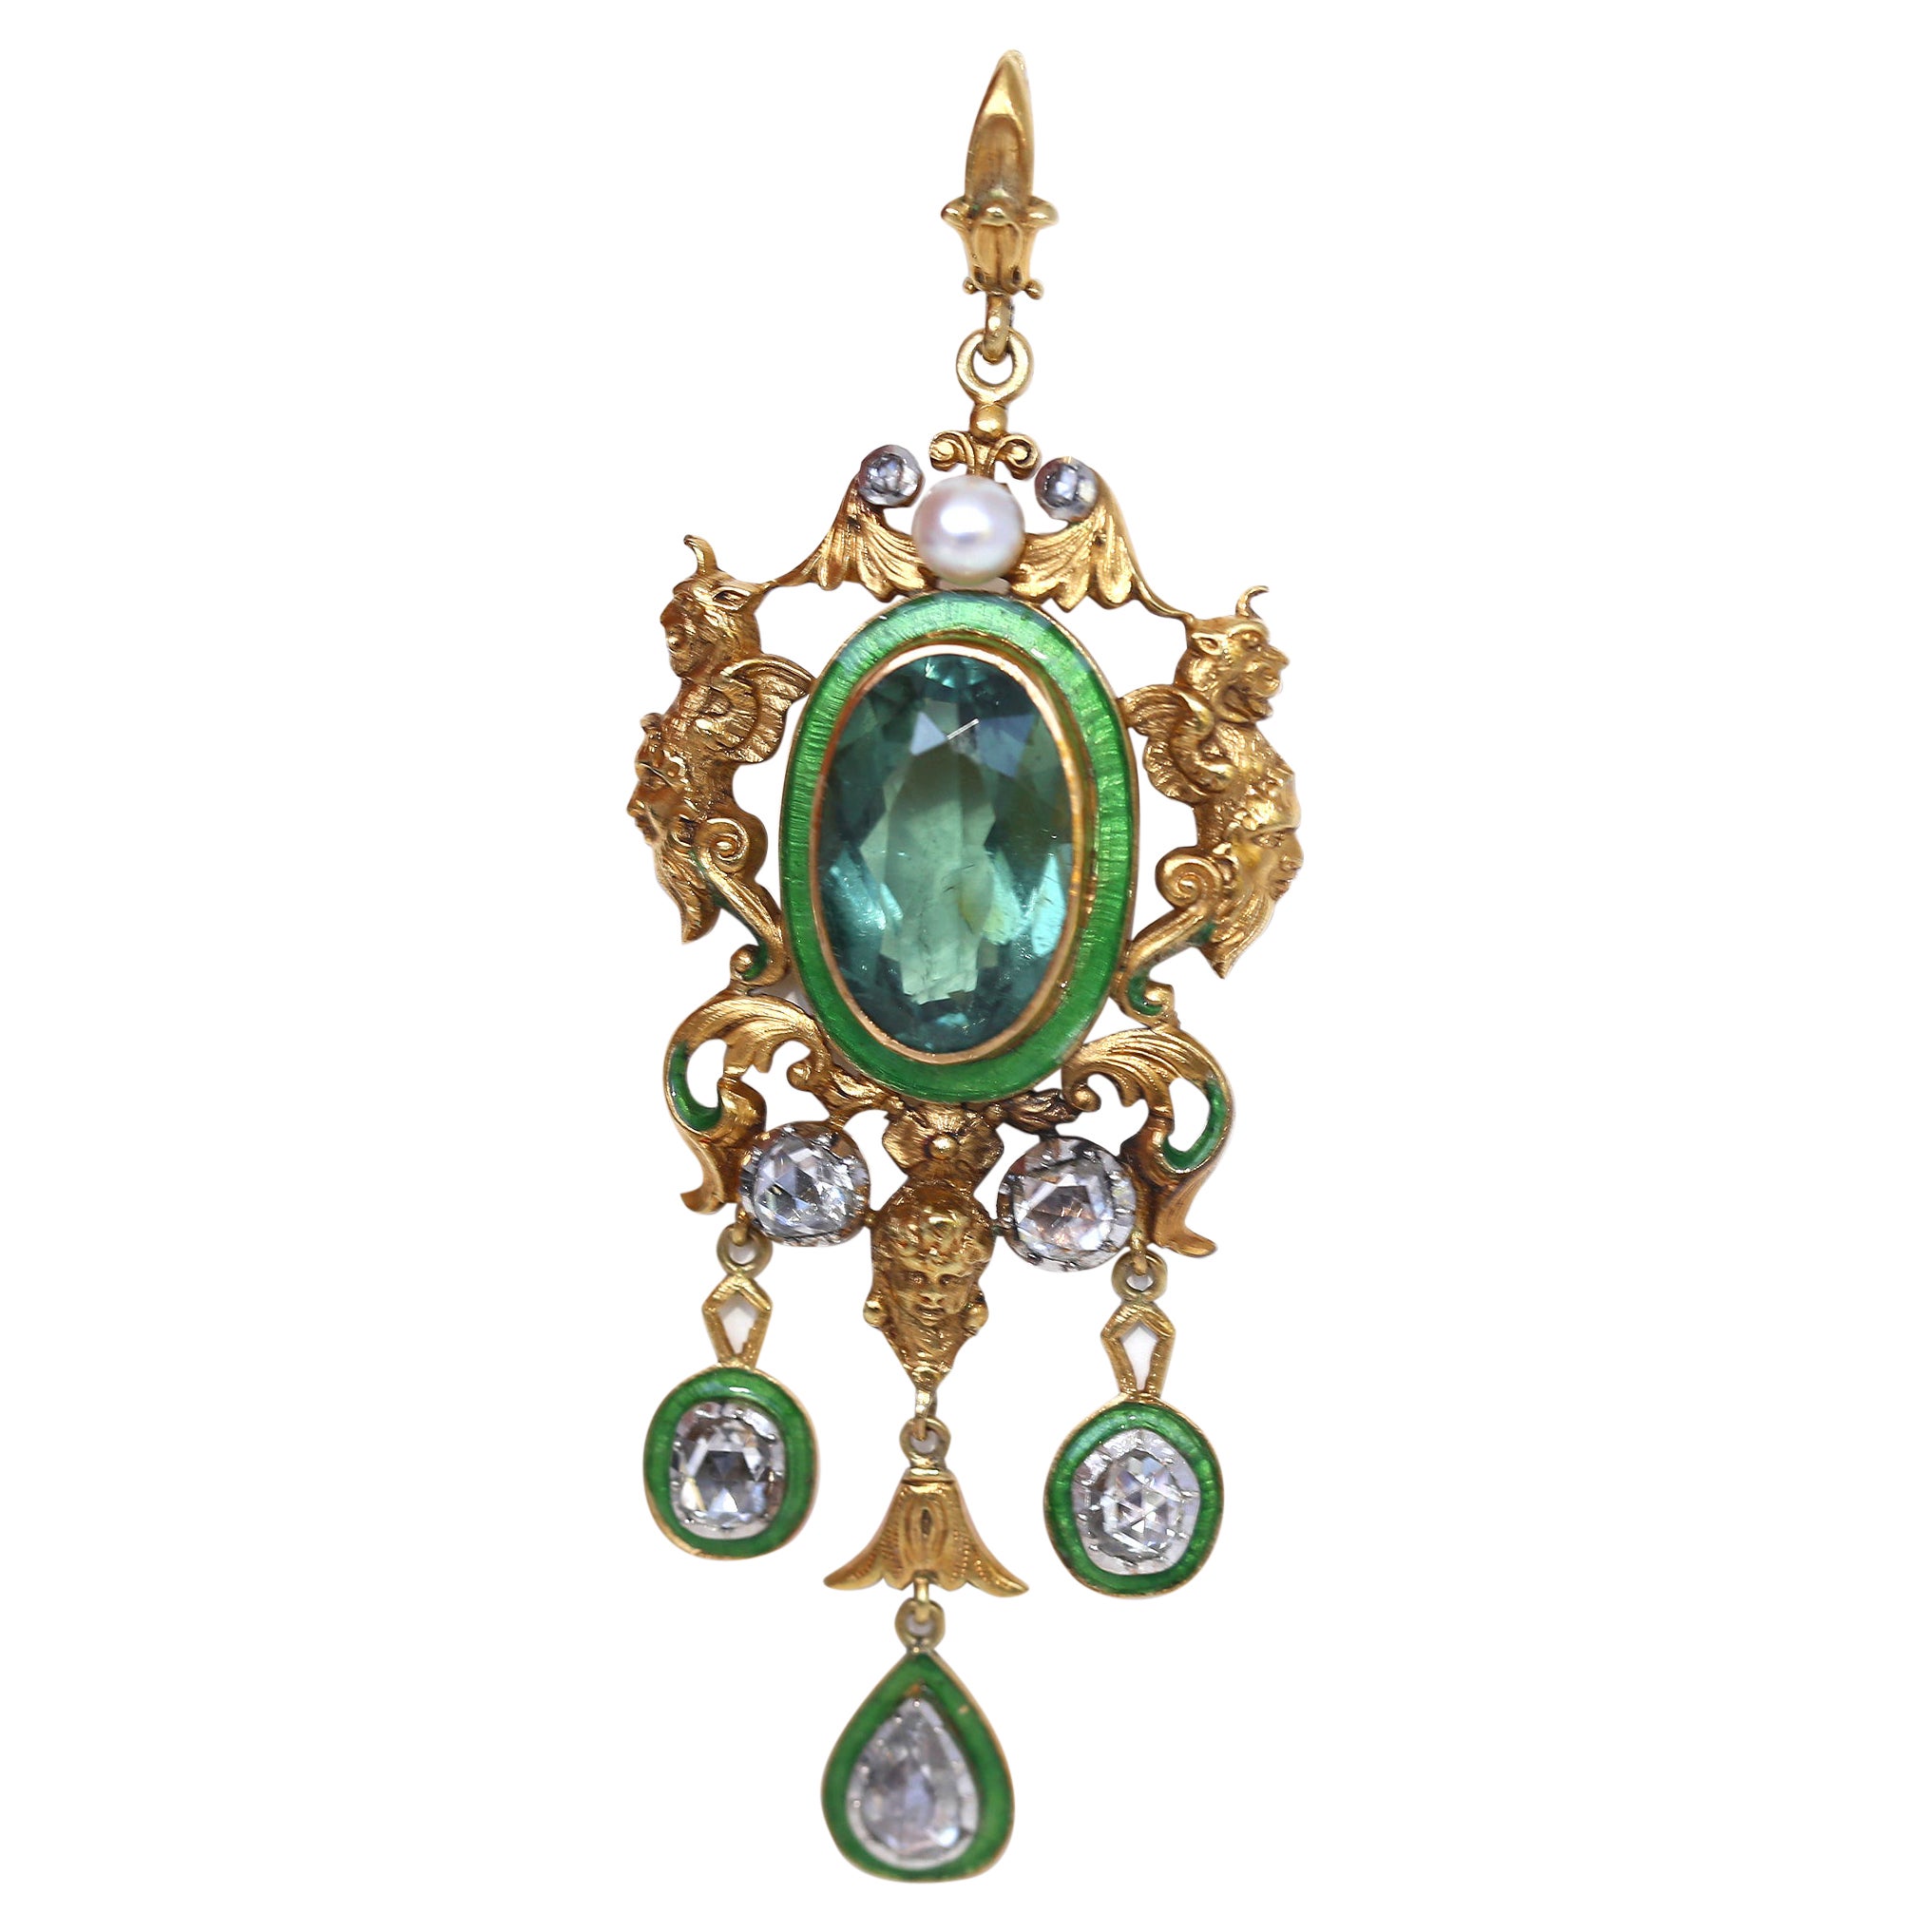 Art Nouveau Tourmaline Enamel Diamonds Yellow Gold Pendant. Created around 1890.
A massive Art Nouveau Pendant with Tourmaline and matching in color bright green Enamel and three old cut Diamonds. Mounted in Yellow Gold. The attention to detail is